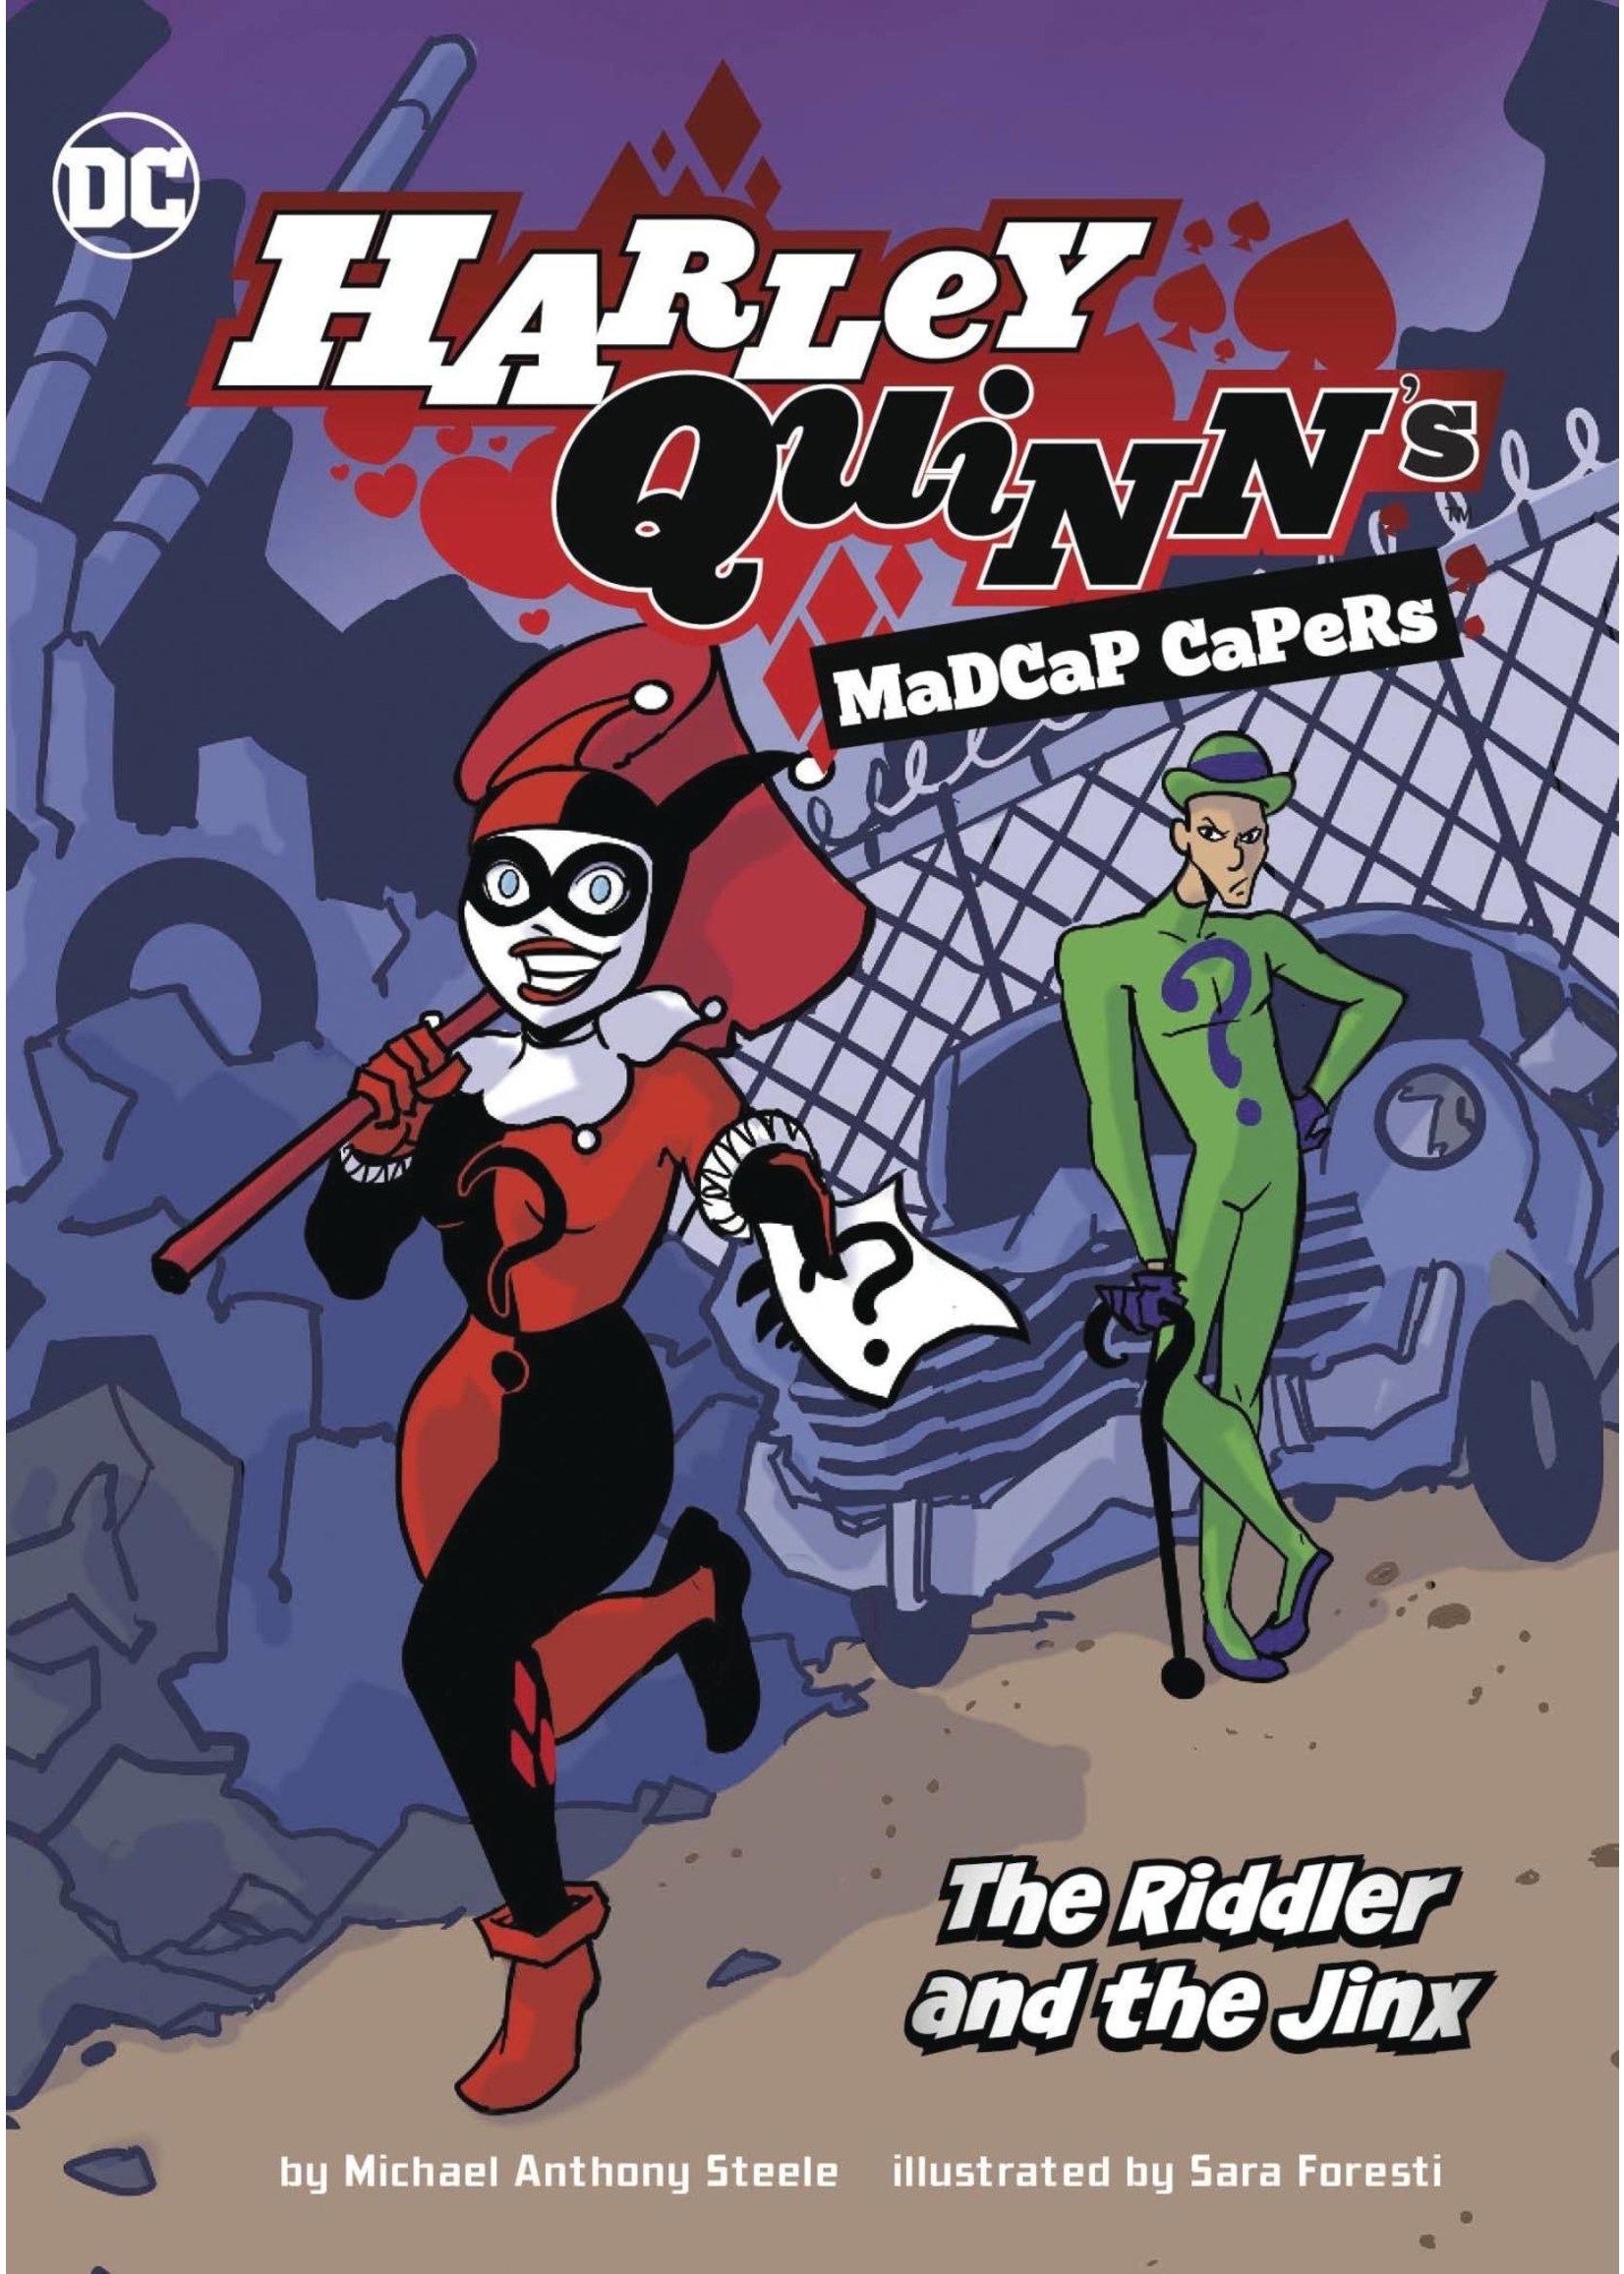 STONE ARCH BOOKS HARLEY QUINN MADCAP CAPERS RIDDLER & JINX